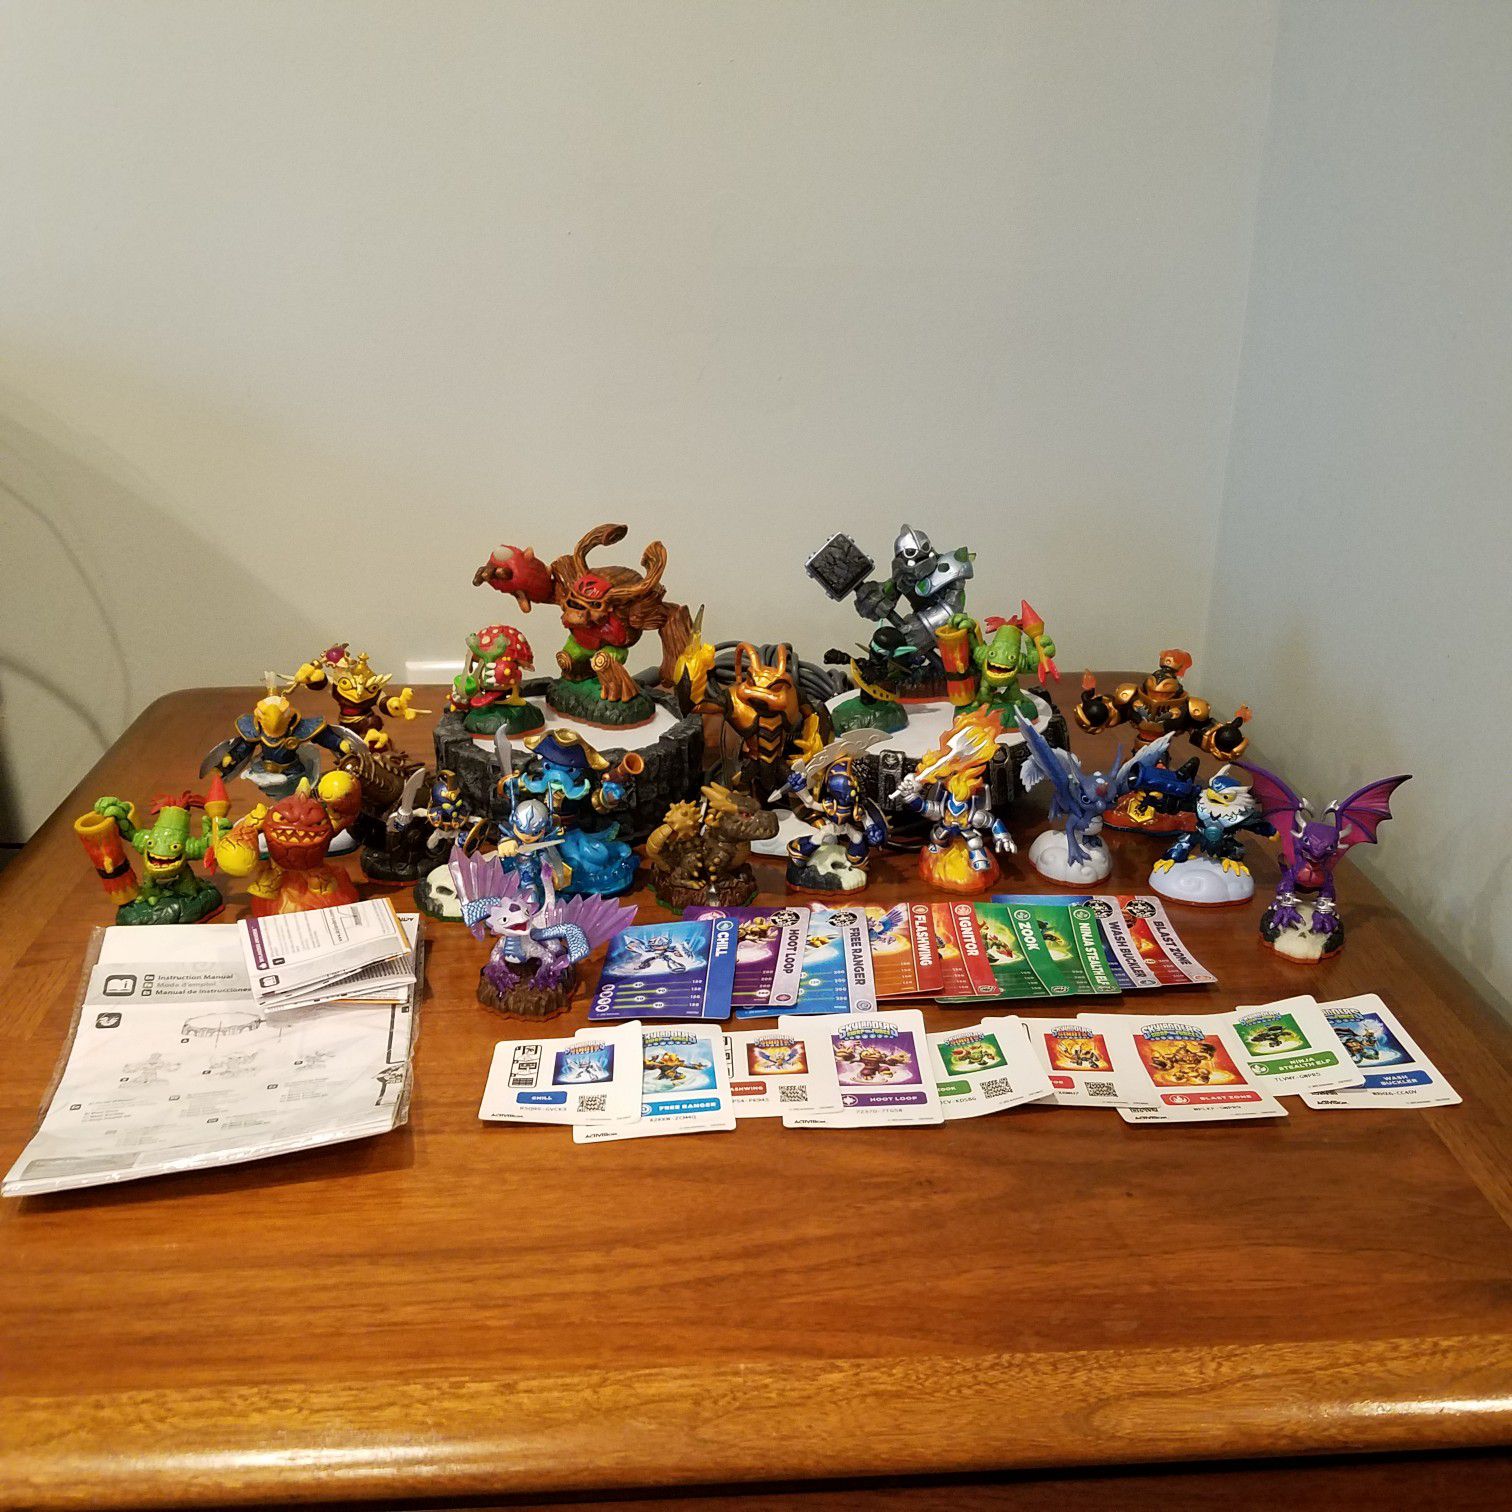 Skylanders Lot of 22 Figures, Cards, Stickers and Two Portals: Swap Force Giants